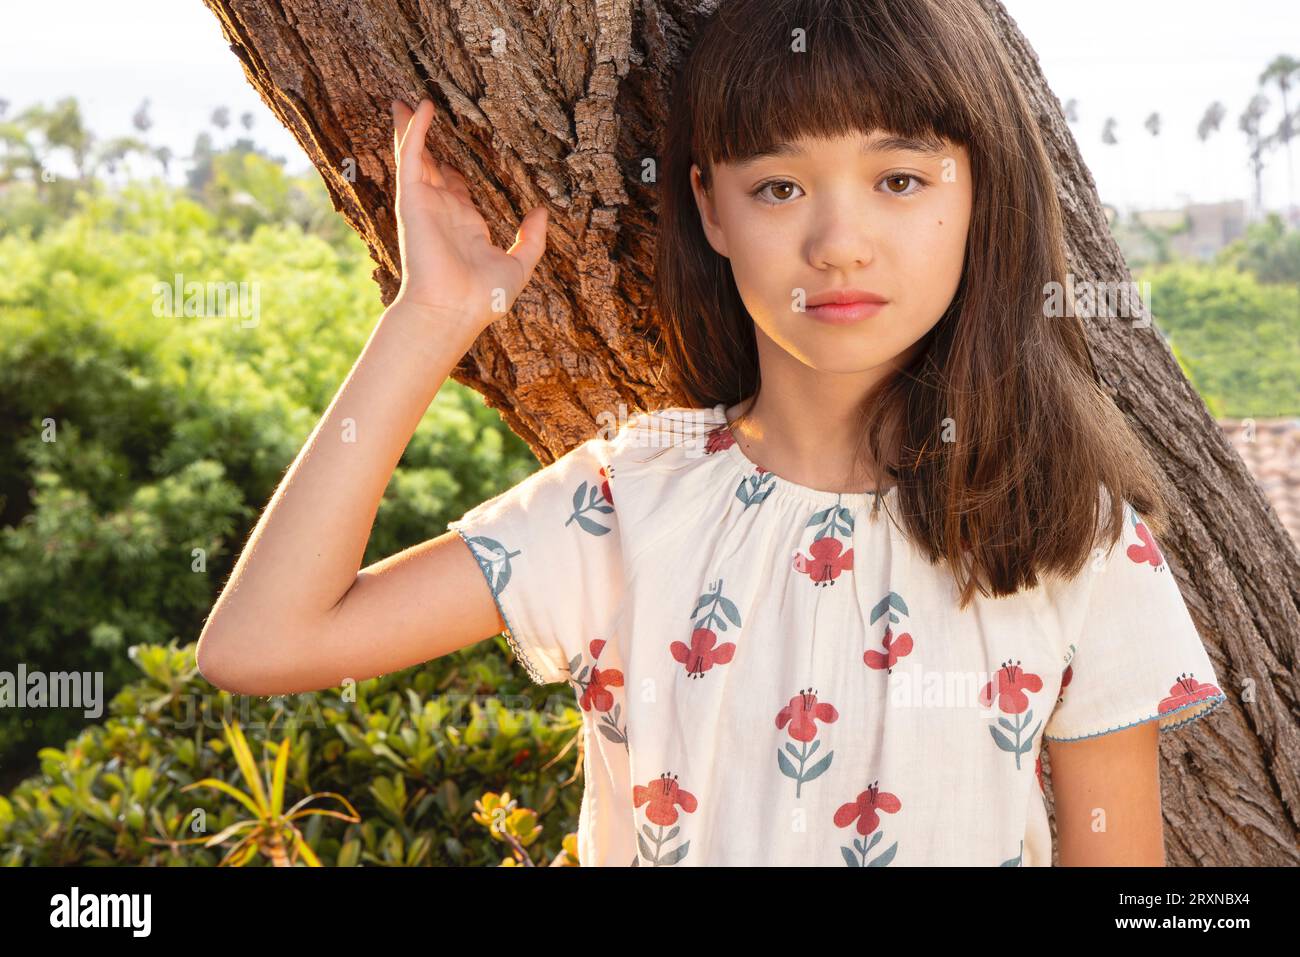 Eleven year old girl leaning against a tree Stock Photo